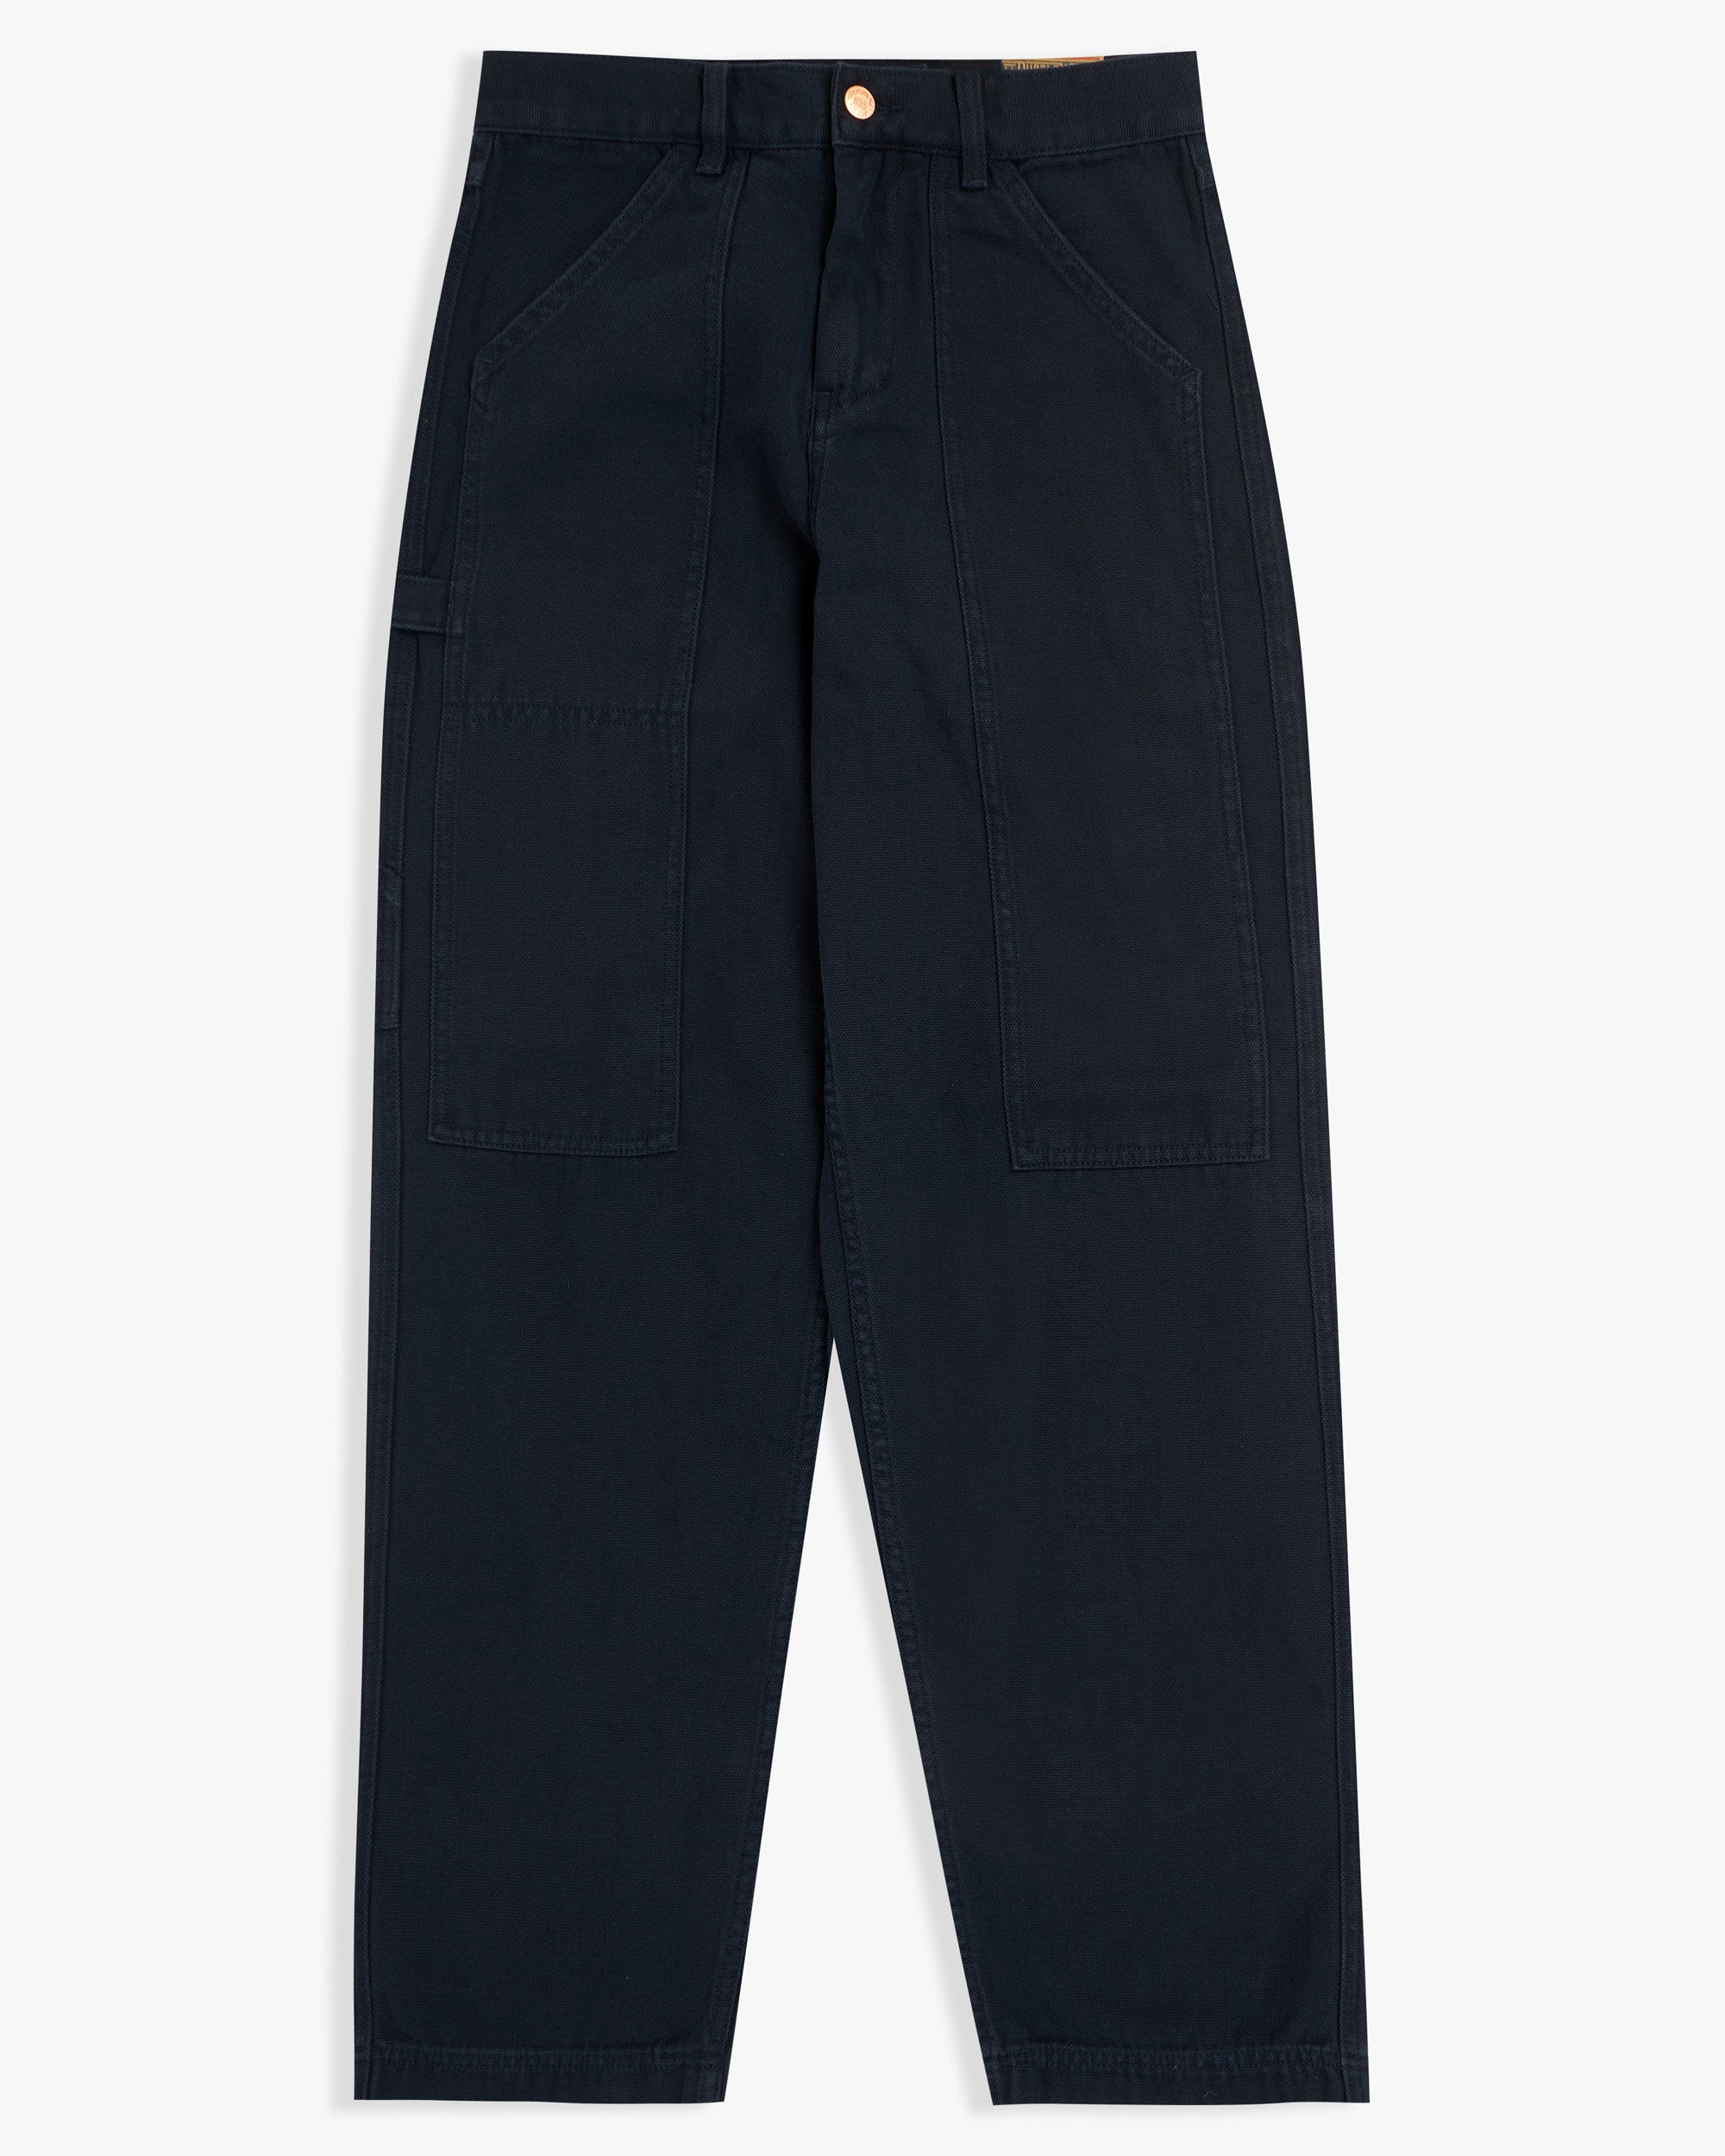 Shop the Best Double Knee Pants for 2023 Here